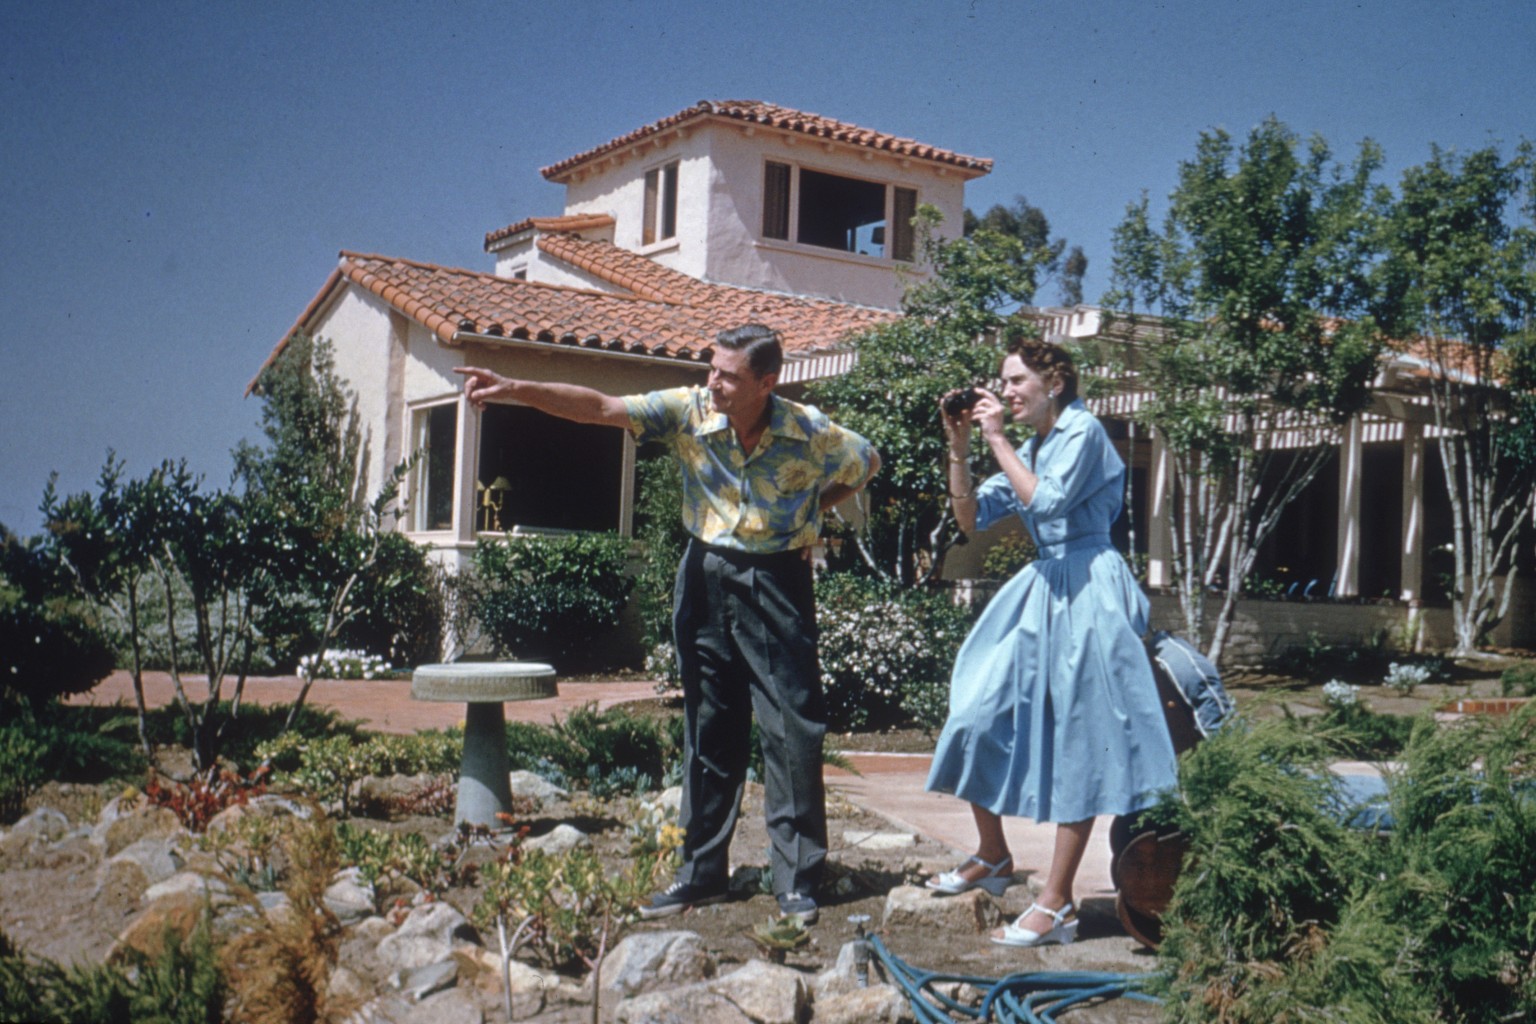 Rare Photo Of Dr. Seuss At Home In 1957 (PHOTO) | HuffPost